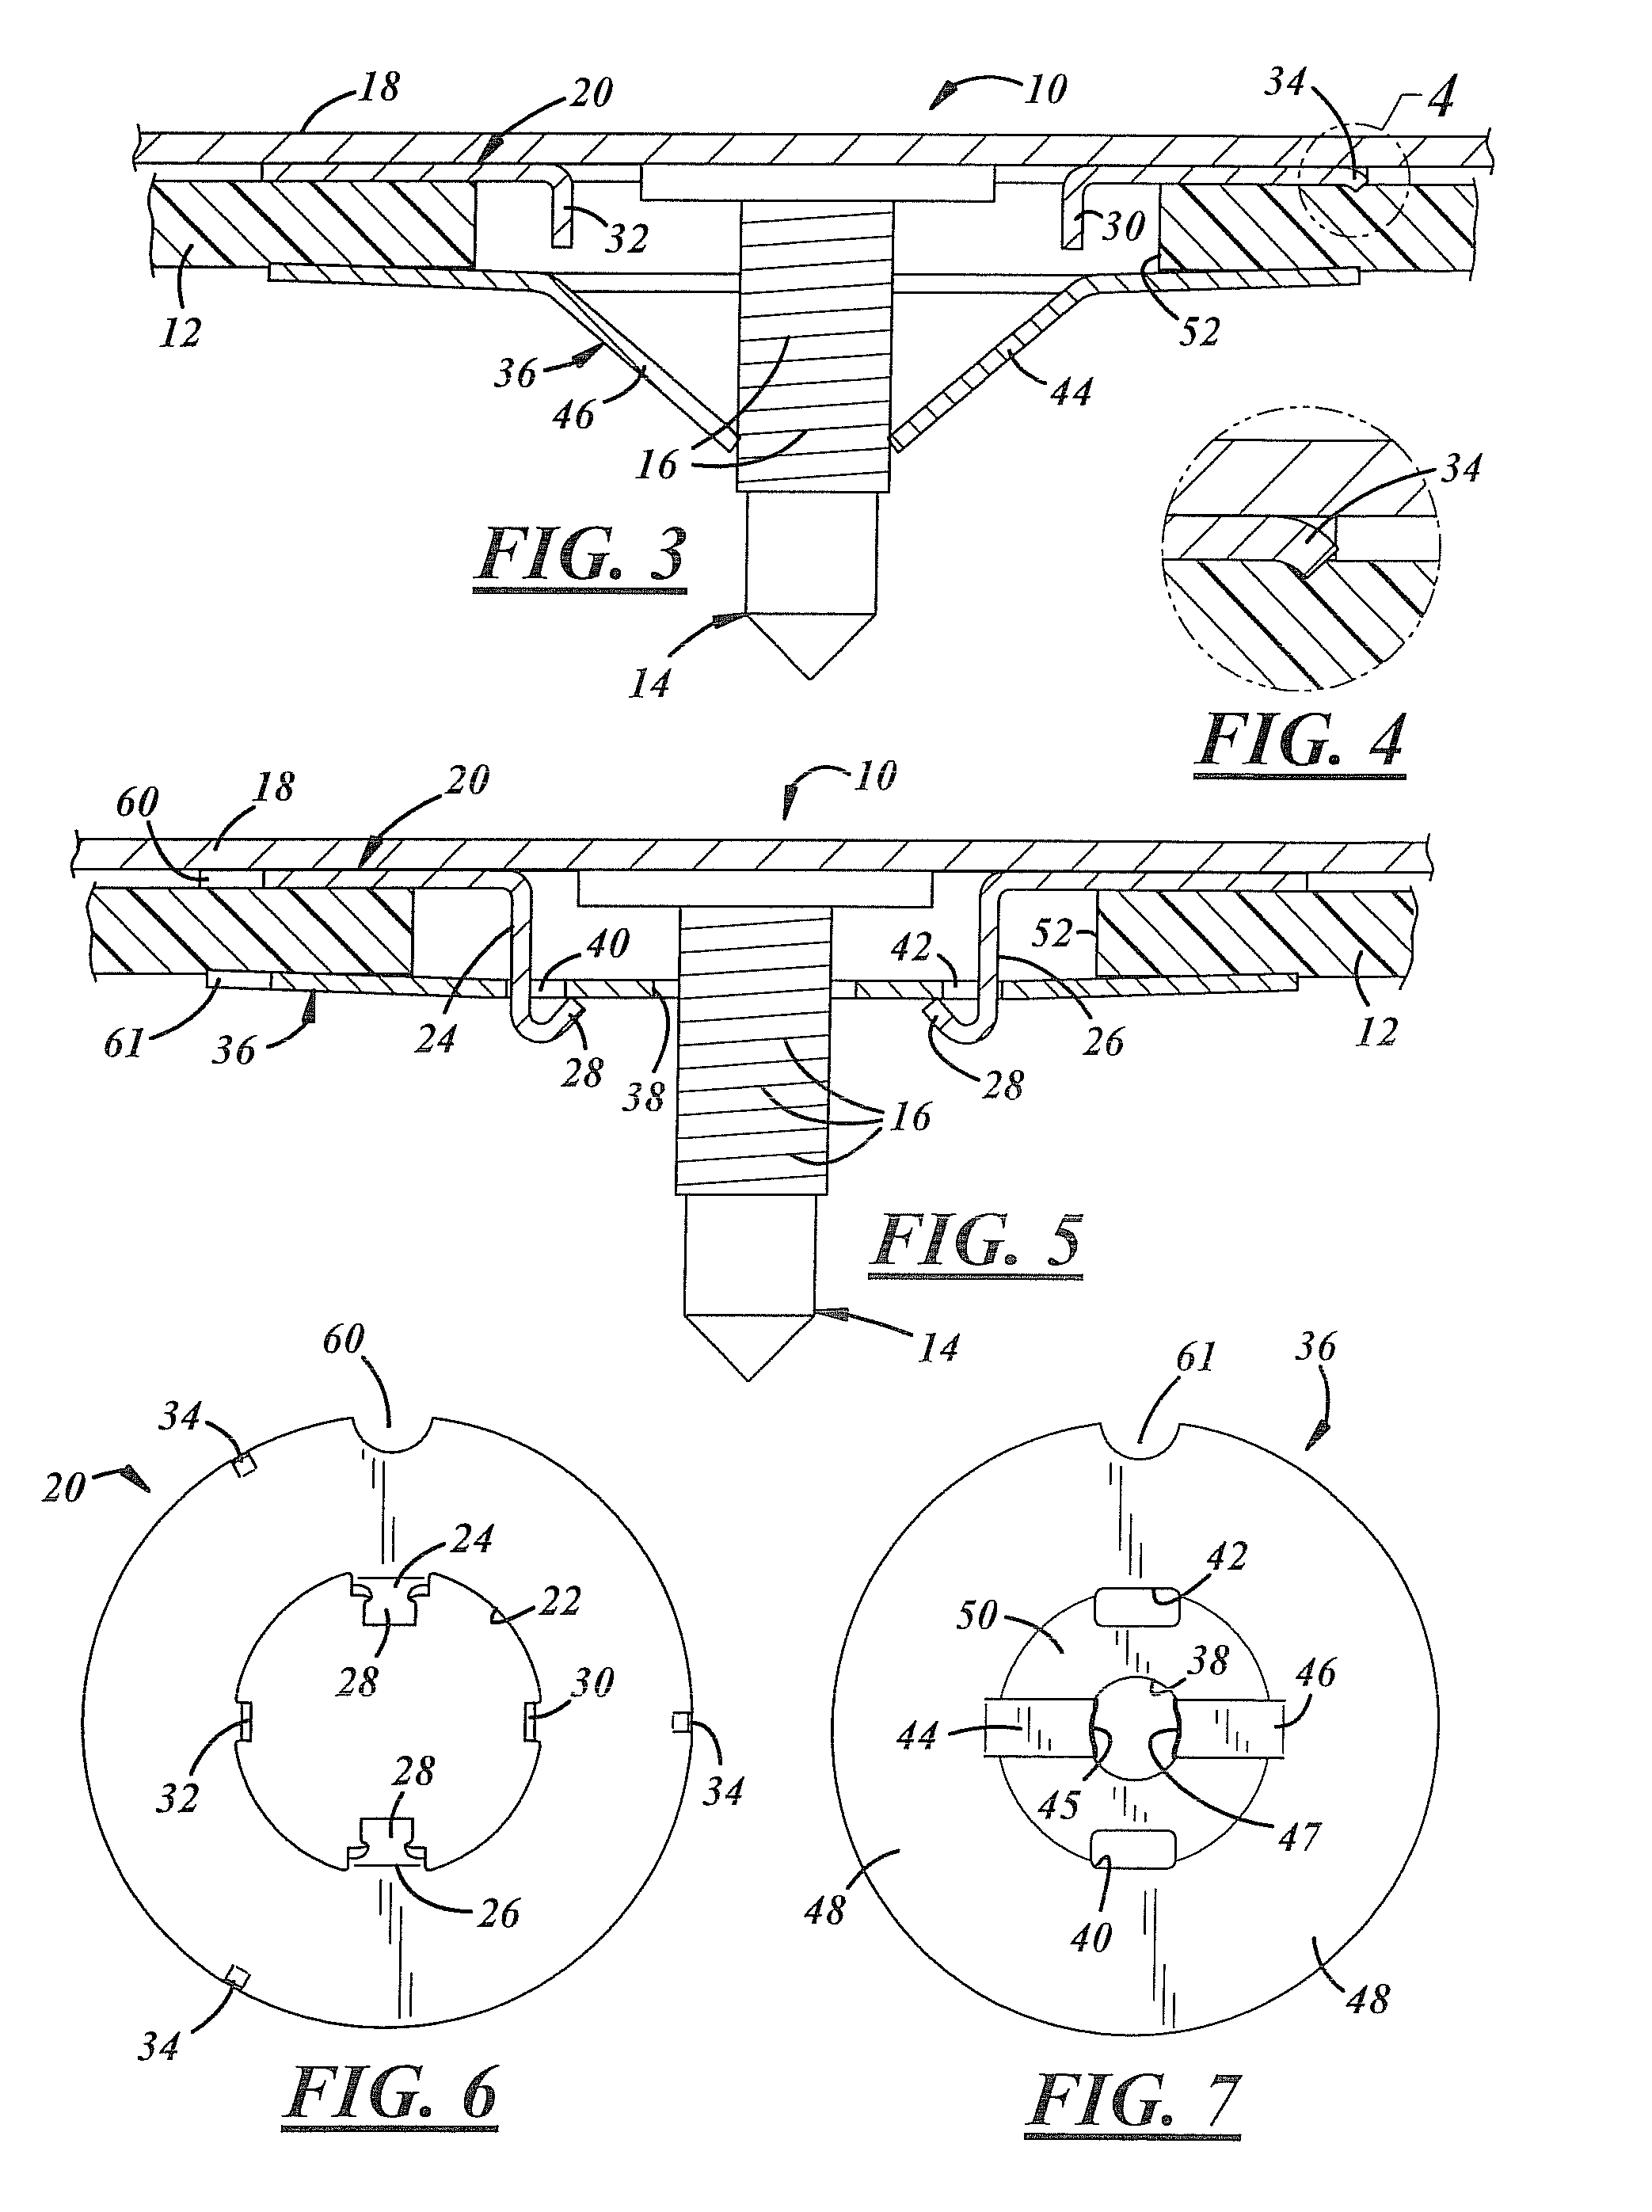 Device for securing a panel to a mounting stud